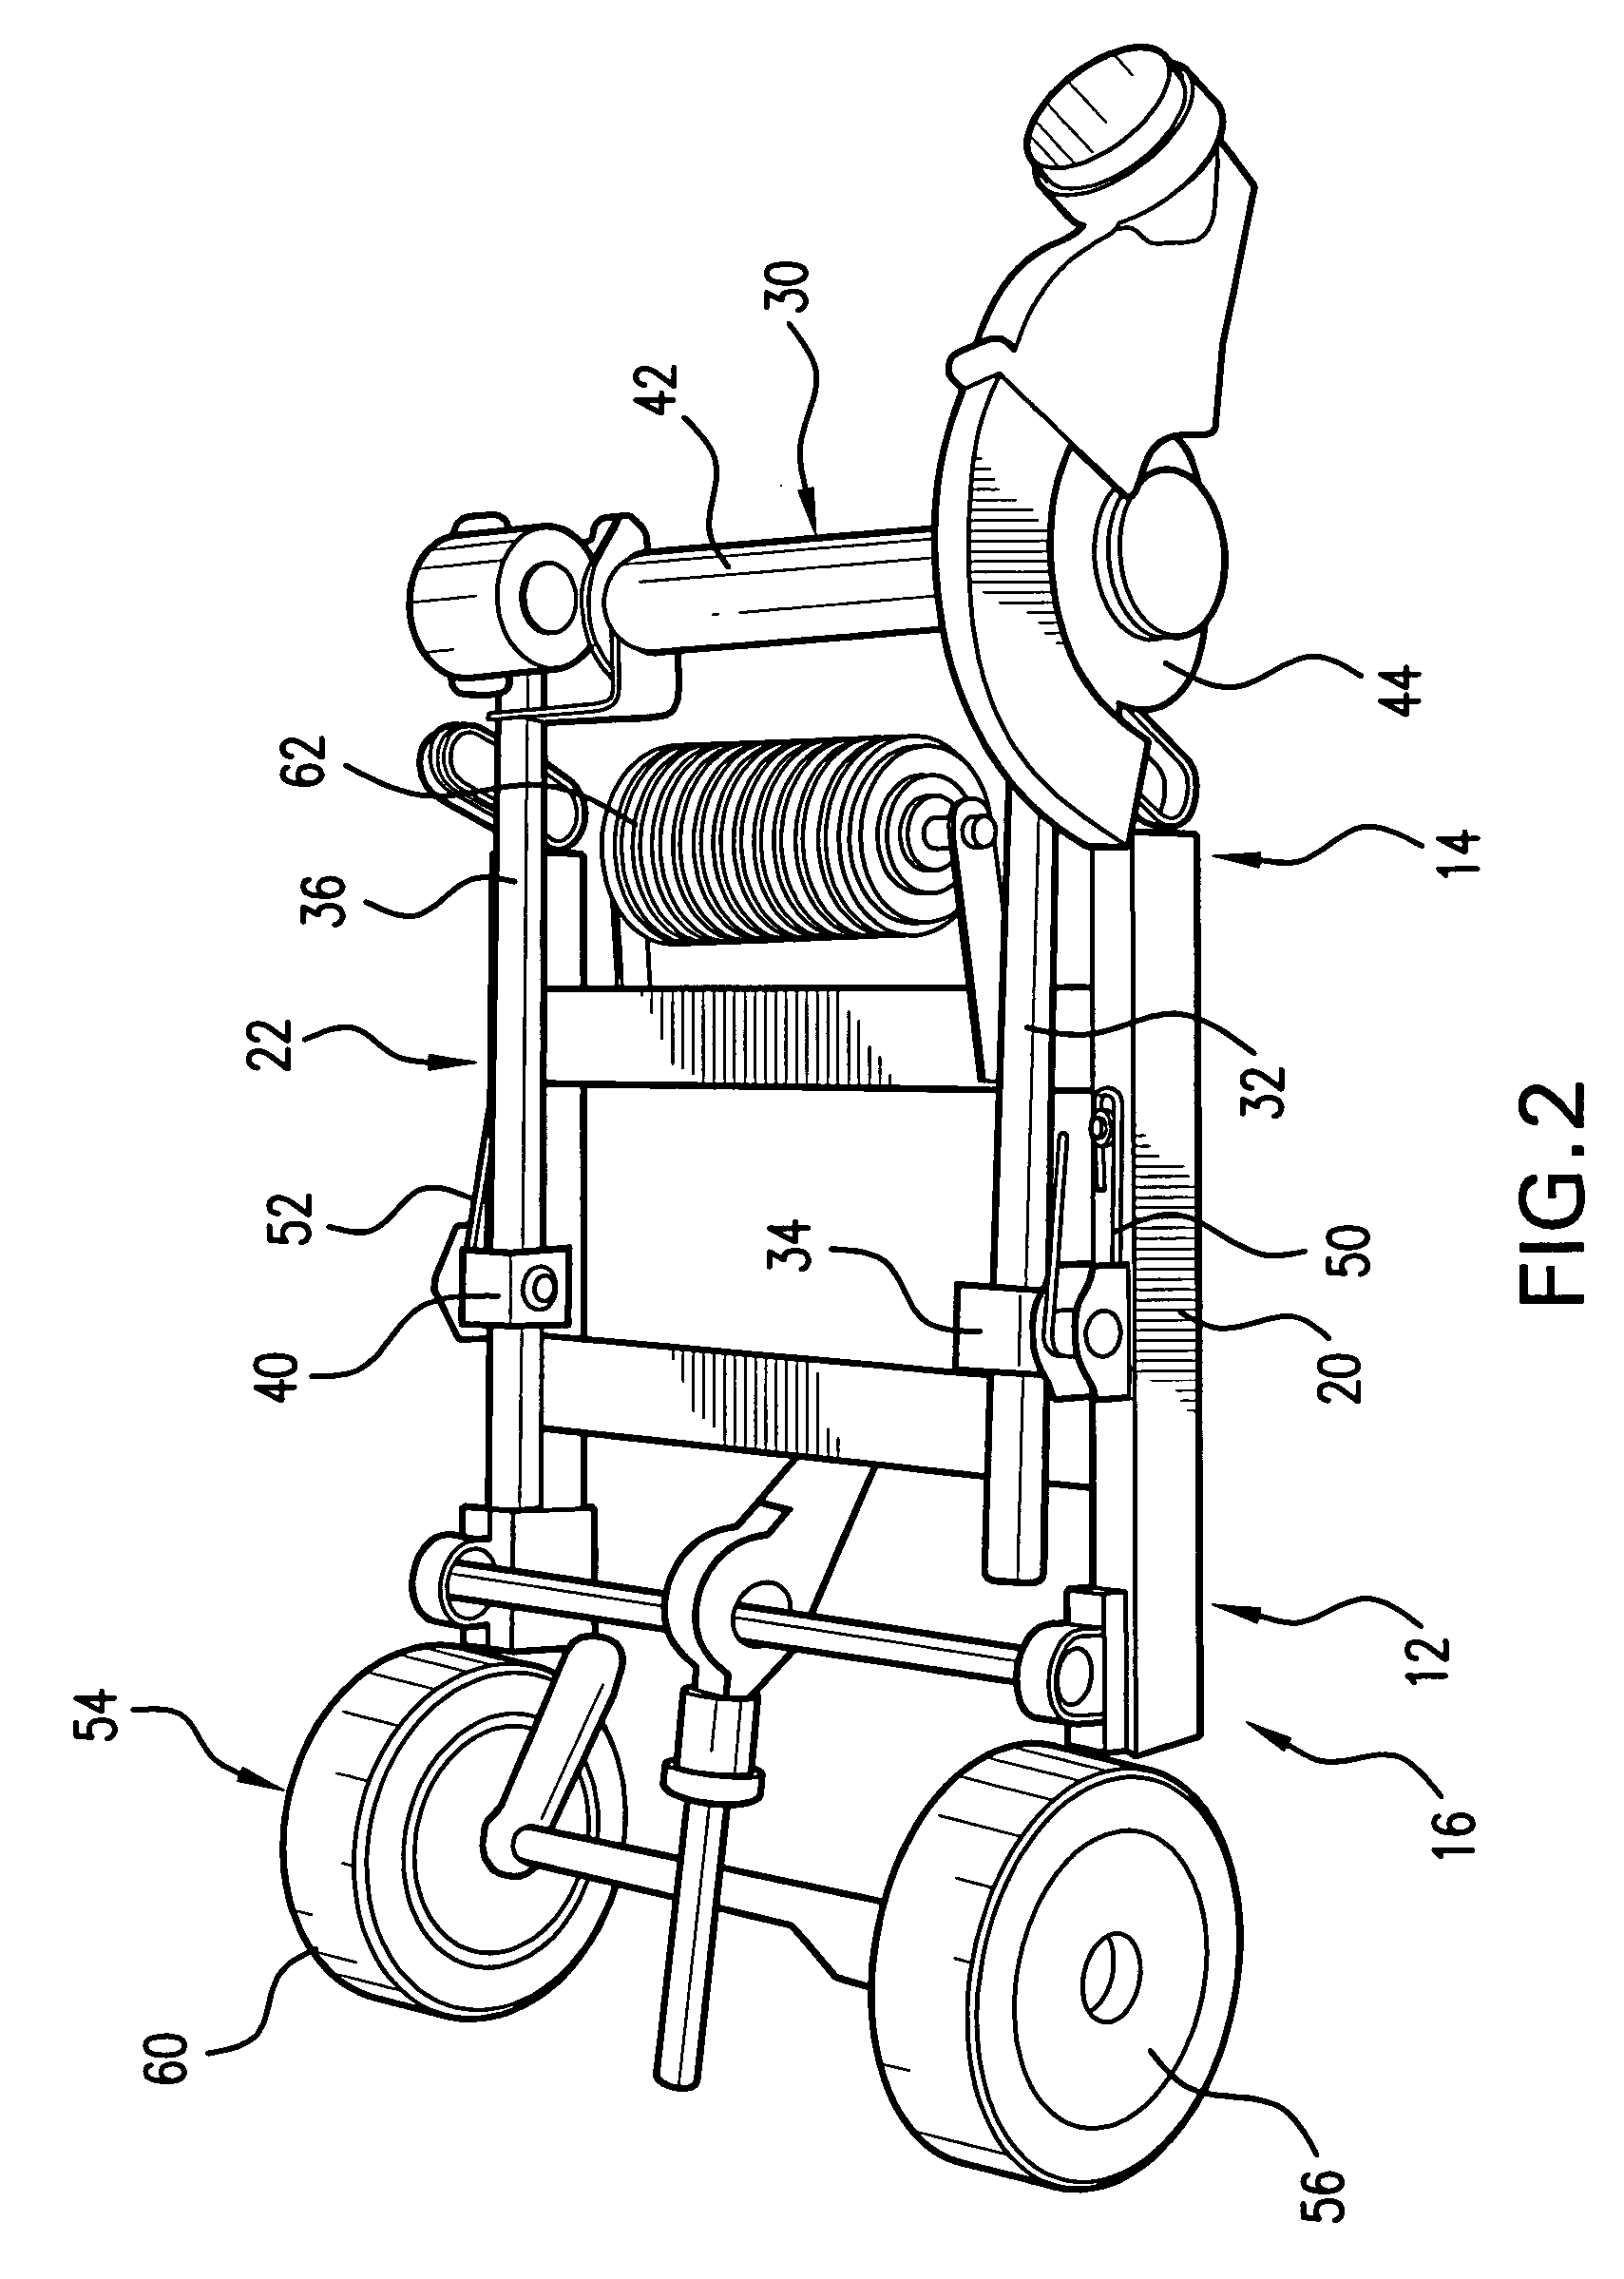 Floating blade apparatus for cutting concrete